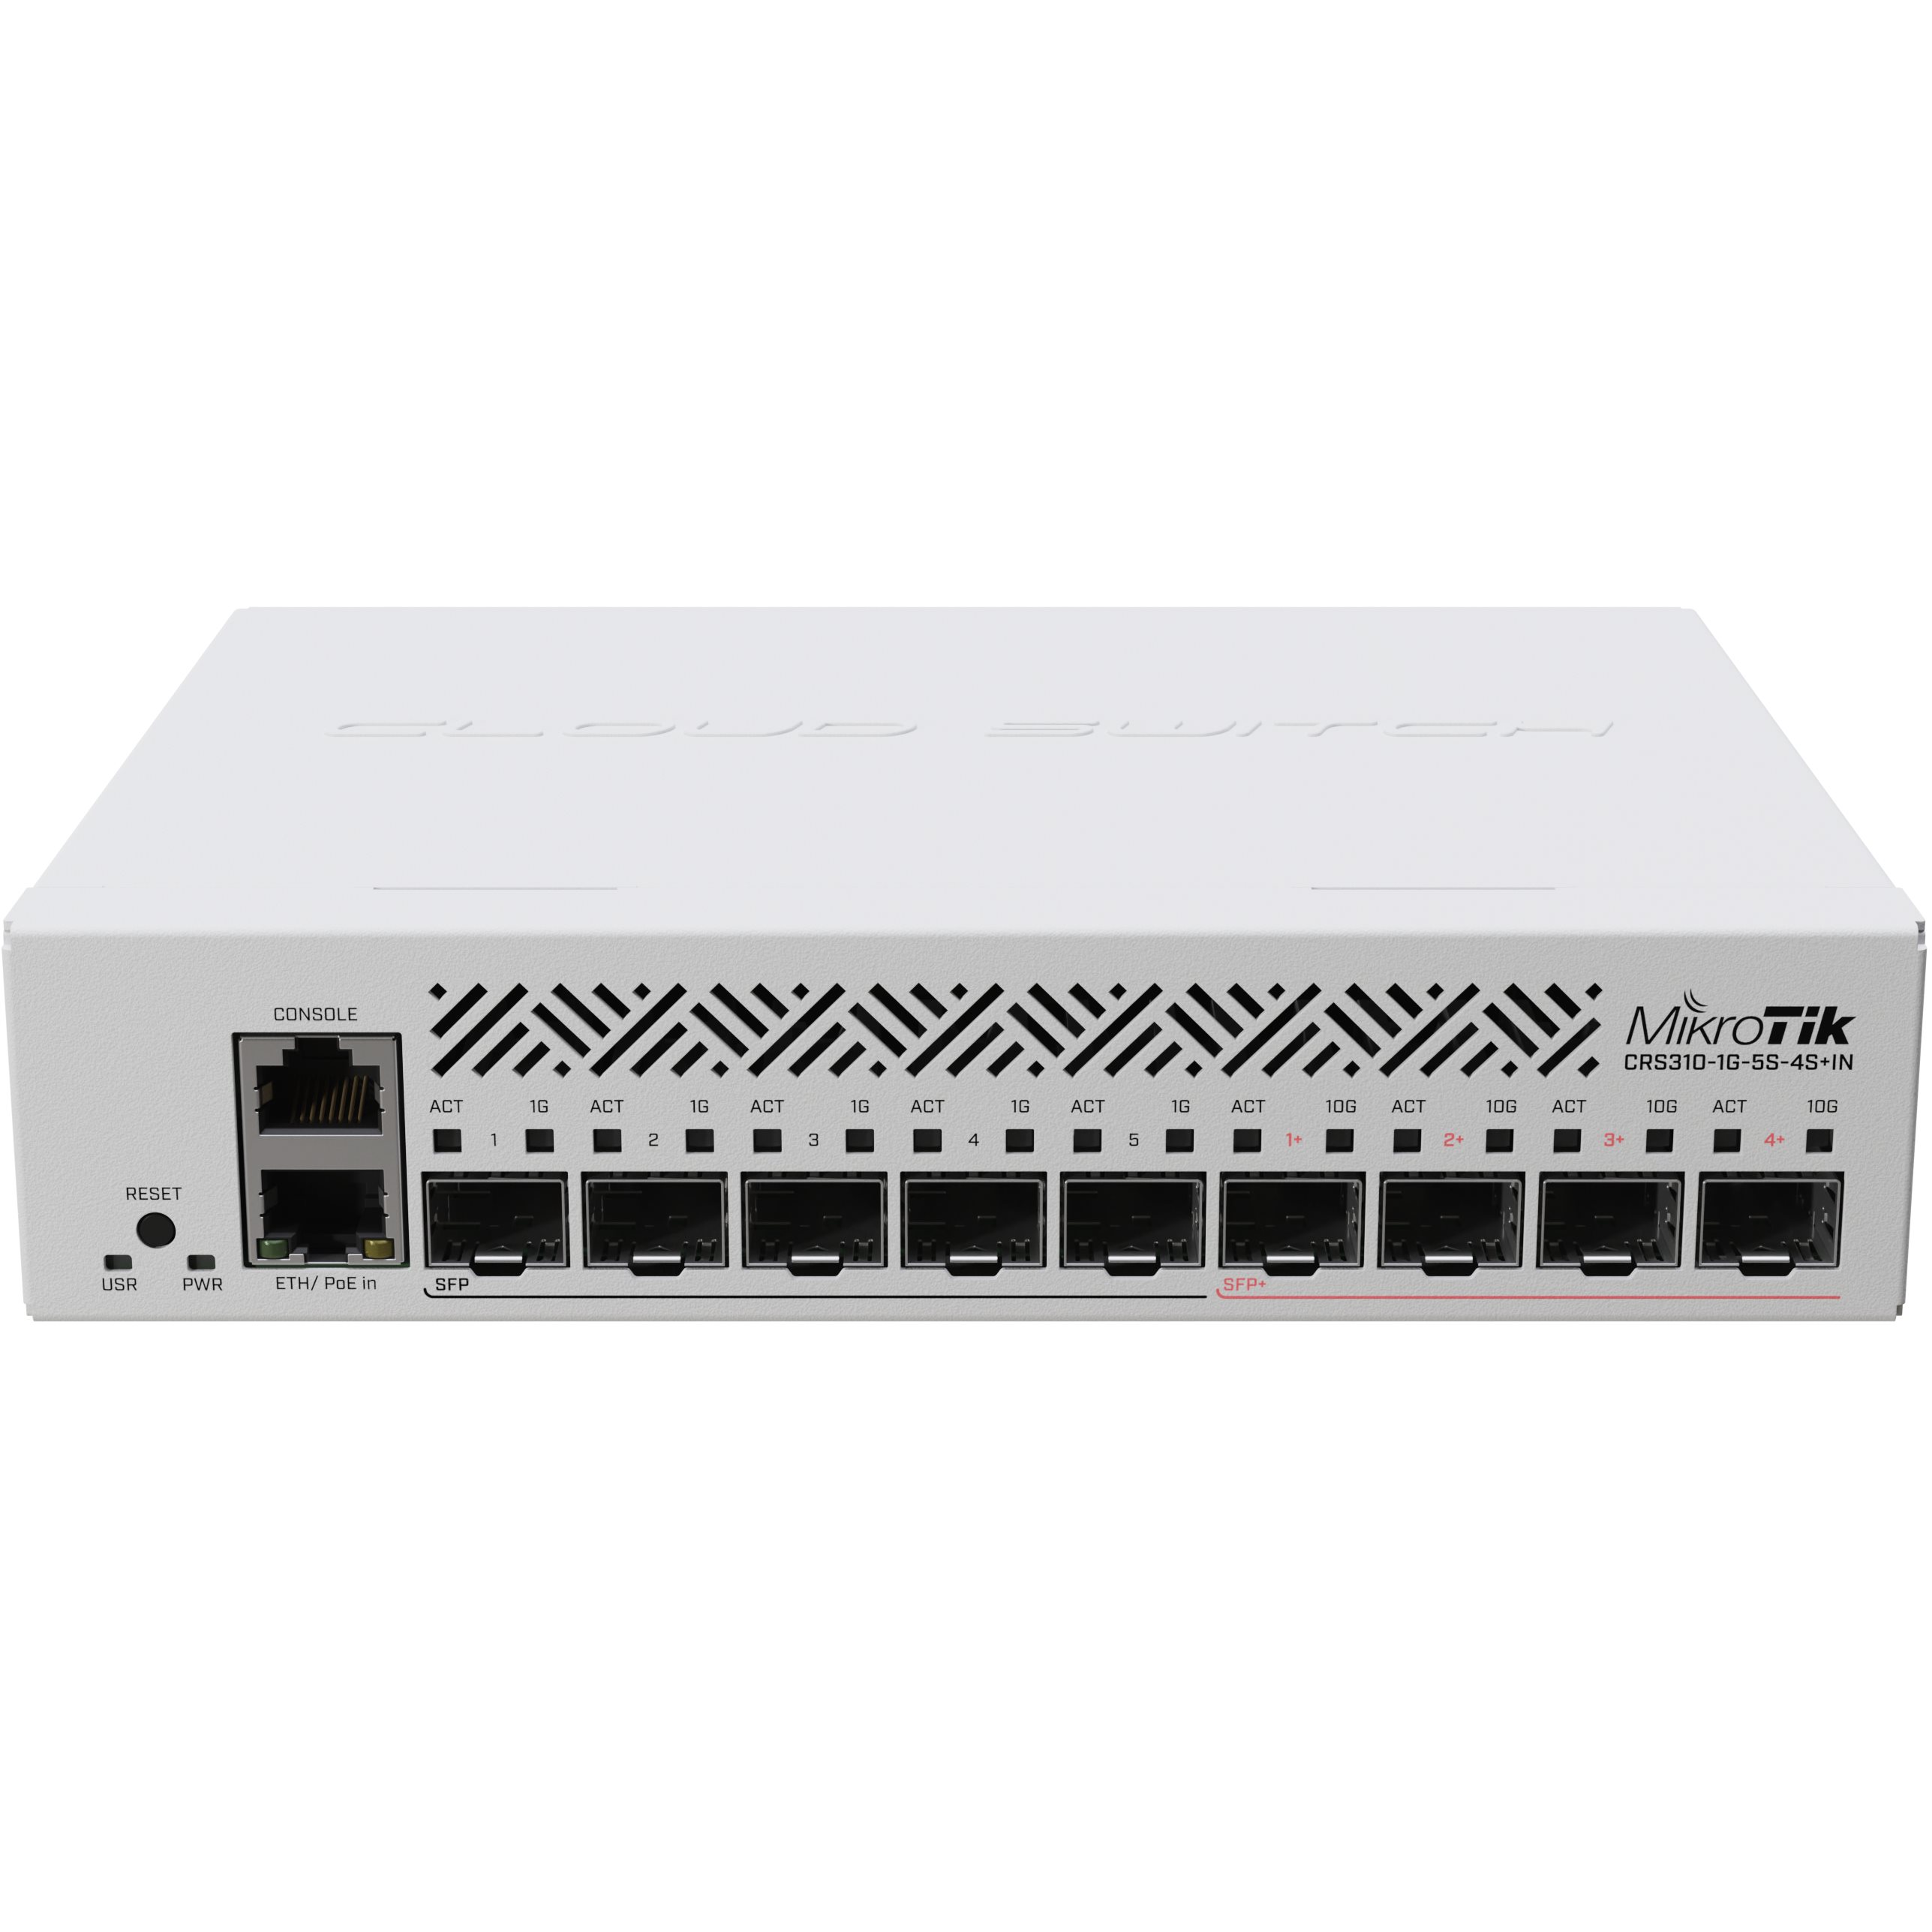   Switch   Switch Cloud 1 Giga 5 SFP 4 SFP+ dual boot CRS310-1G-5S-4S+IN